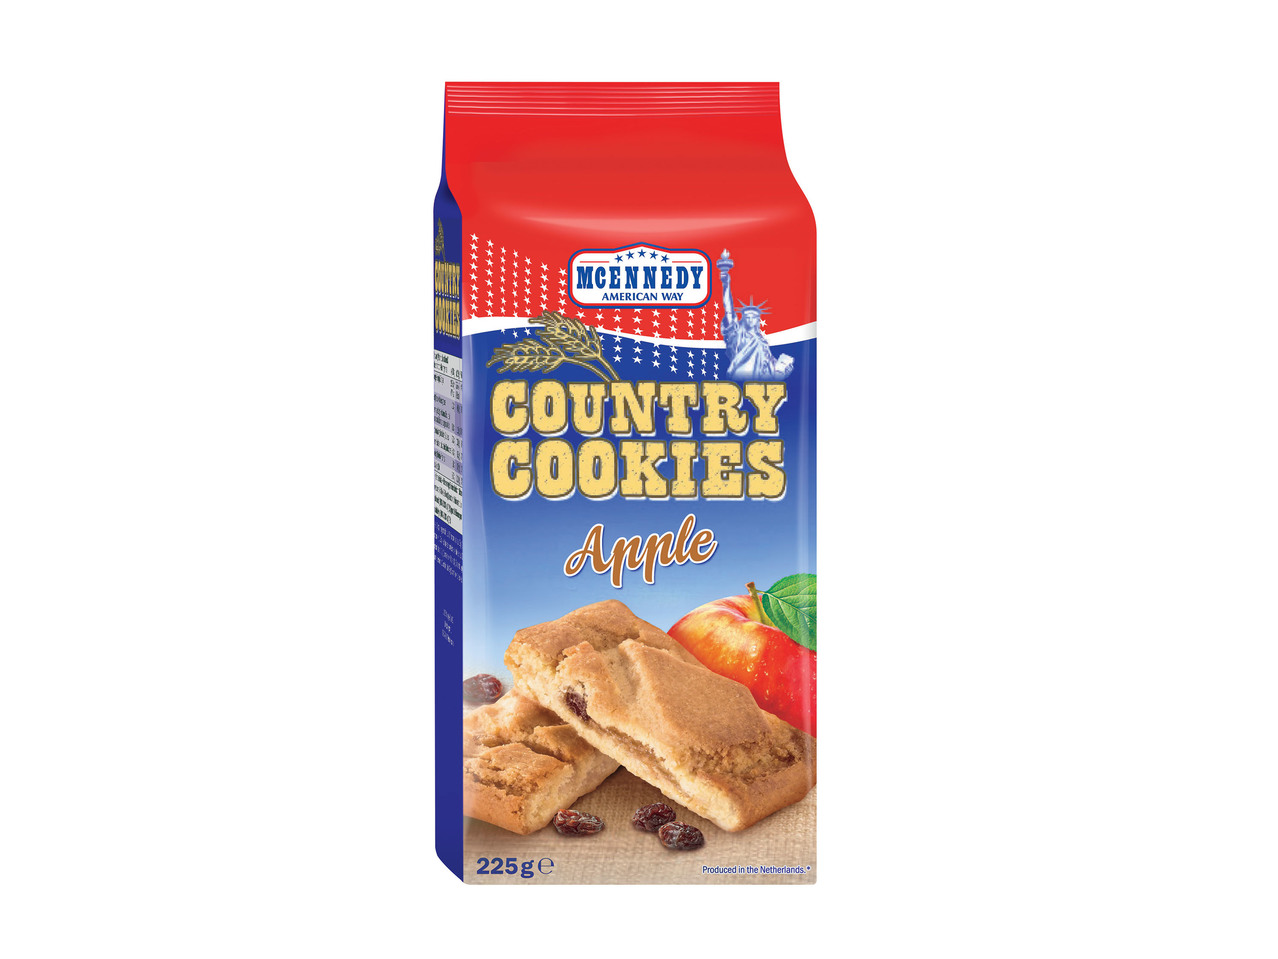 Country cookies1